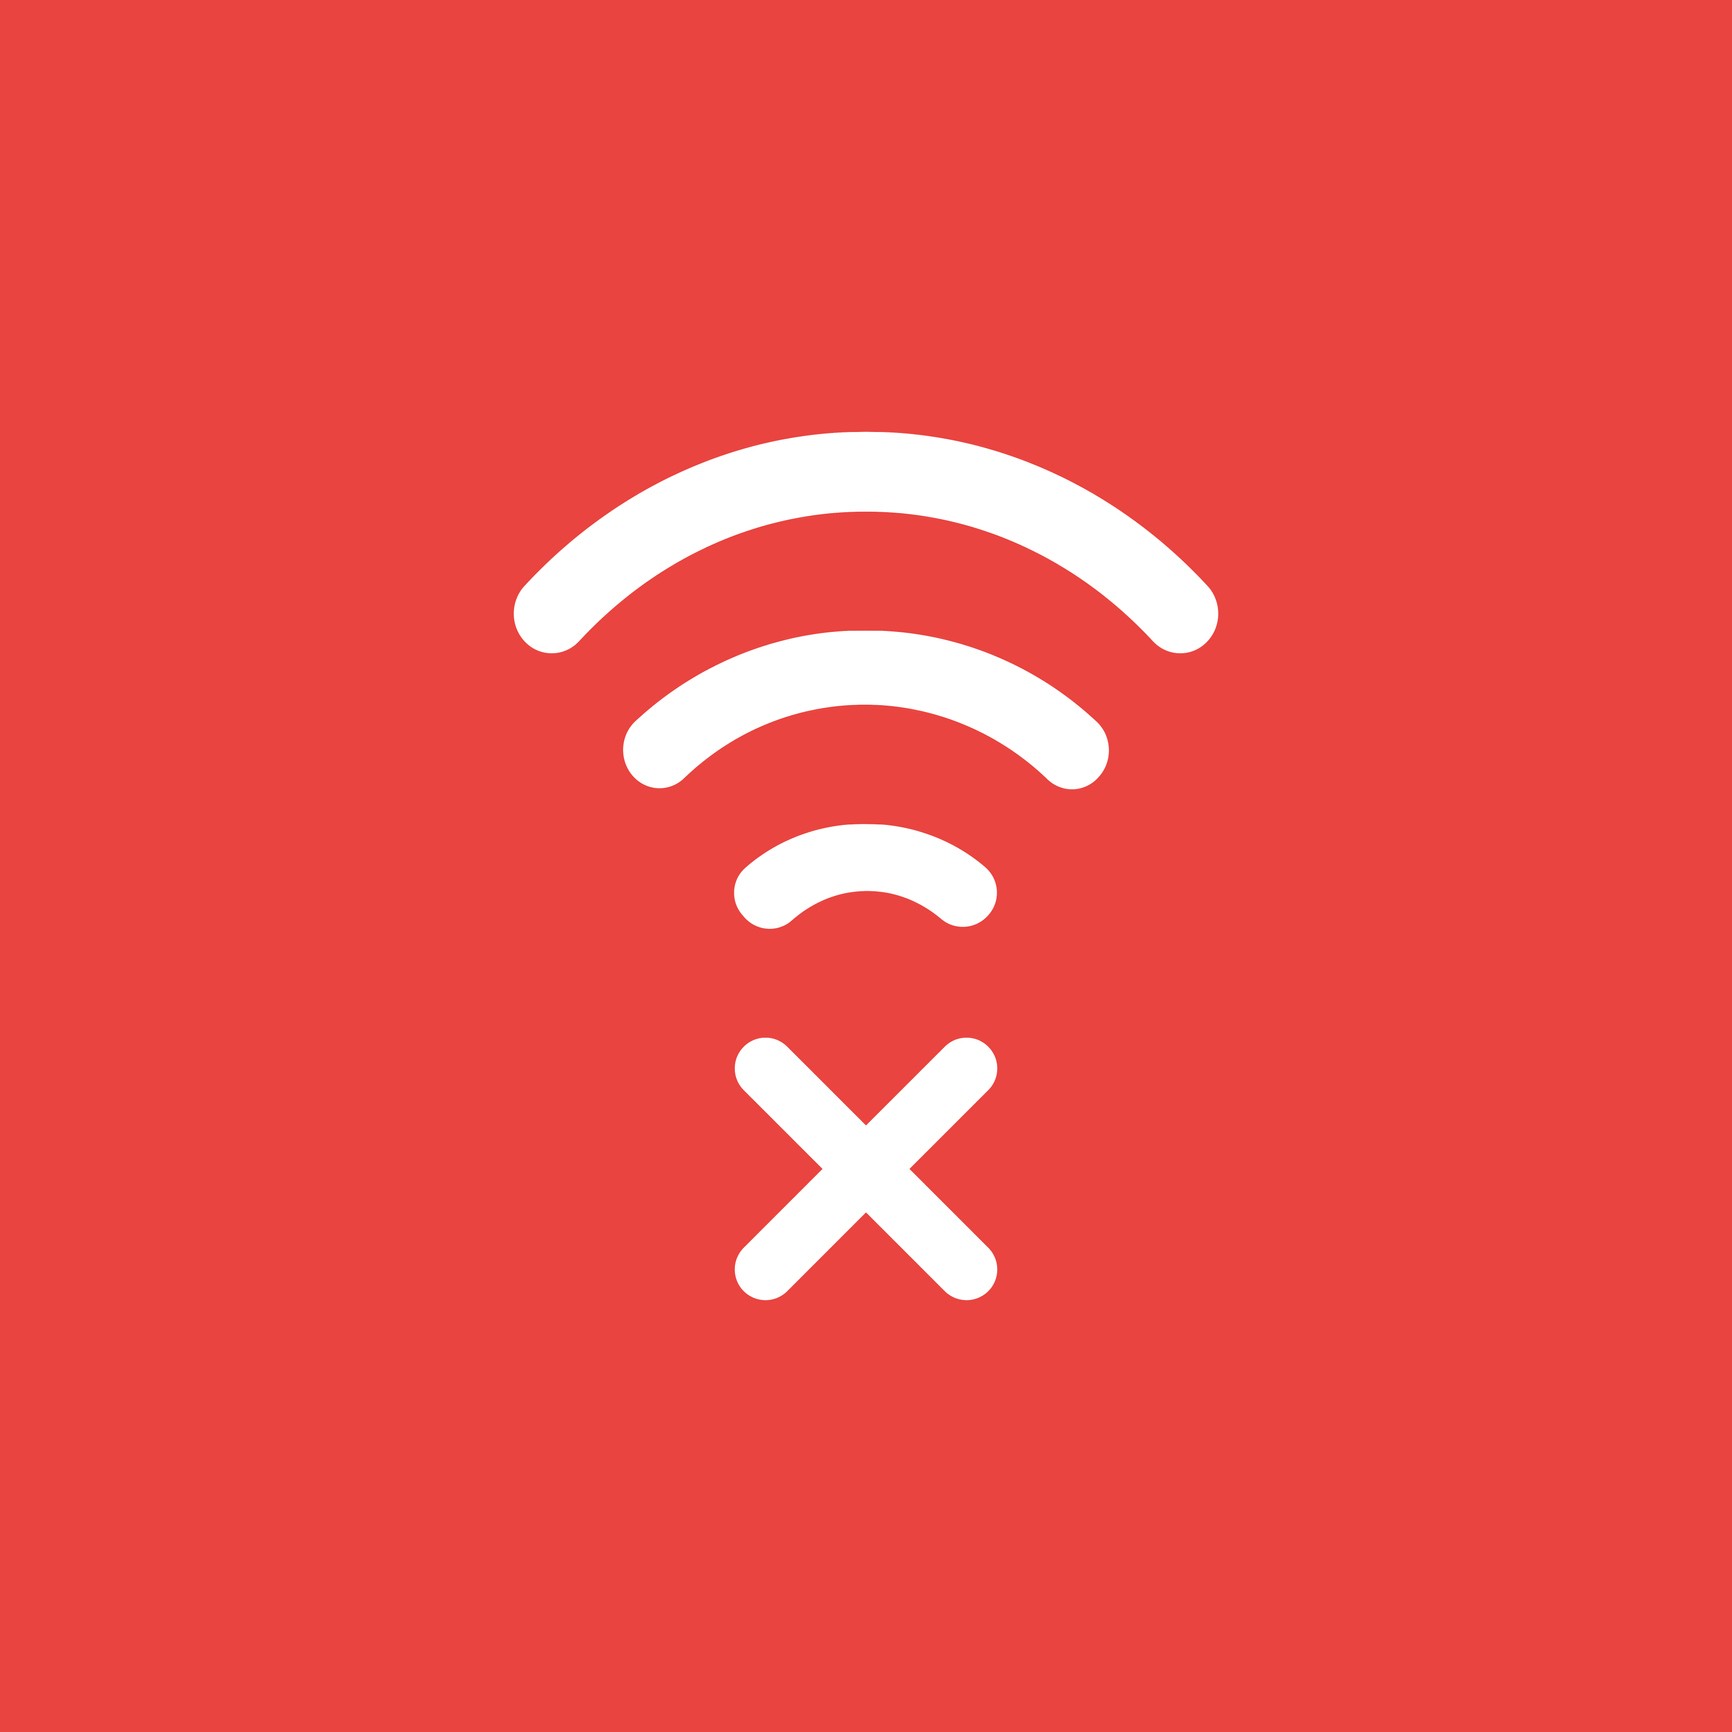 Flat vector icon concept of wireless wifi symbol with x mark on red background. (Foto: Getty Images/iStockphoto)